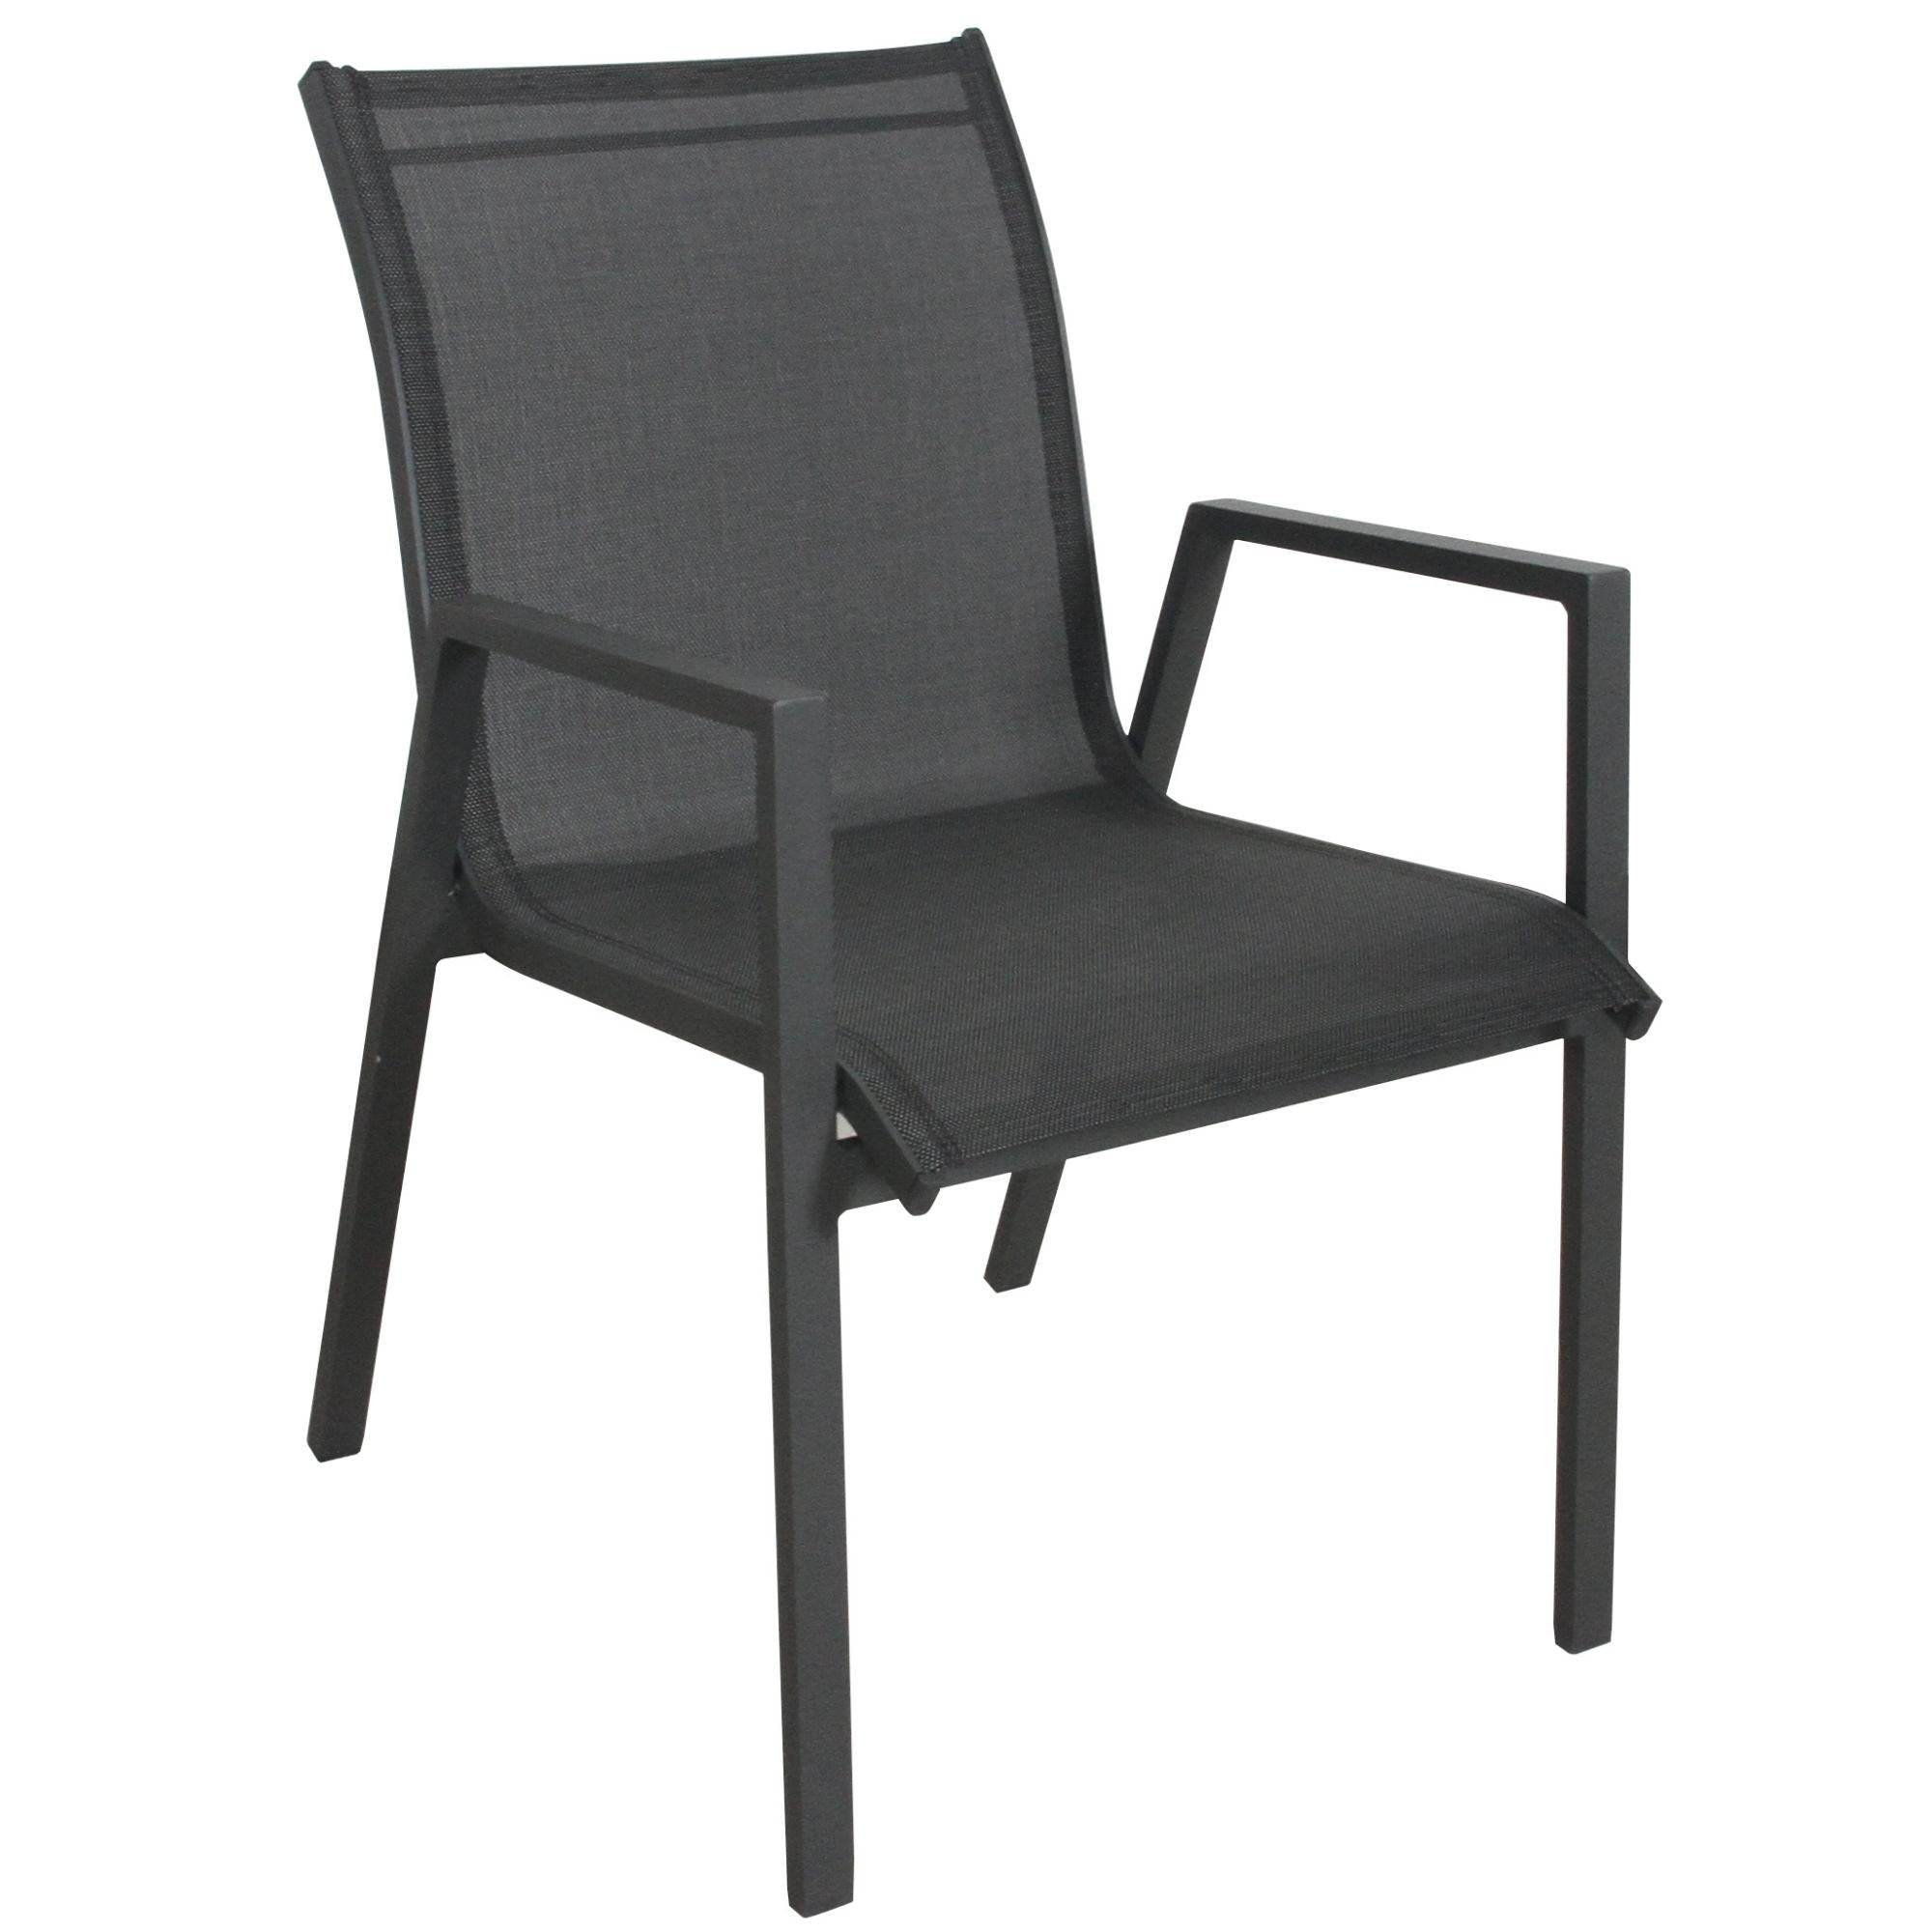 All-Weather Aluminium Dining Chairs, Stackable, 2pc Set, Iberia